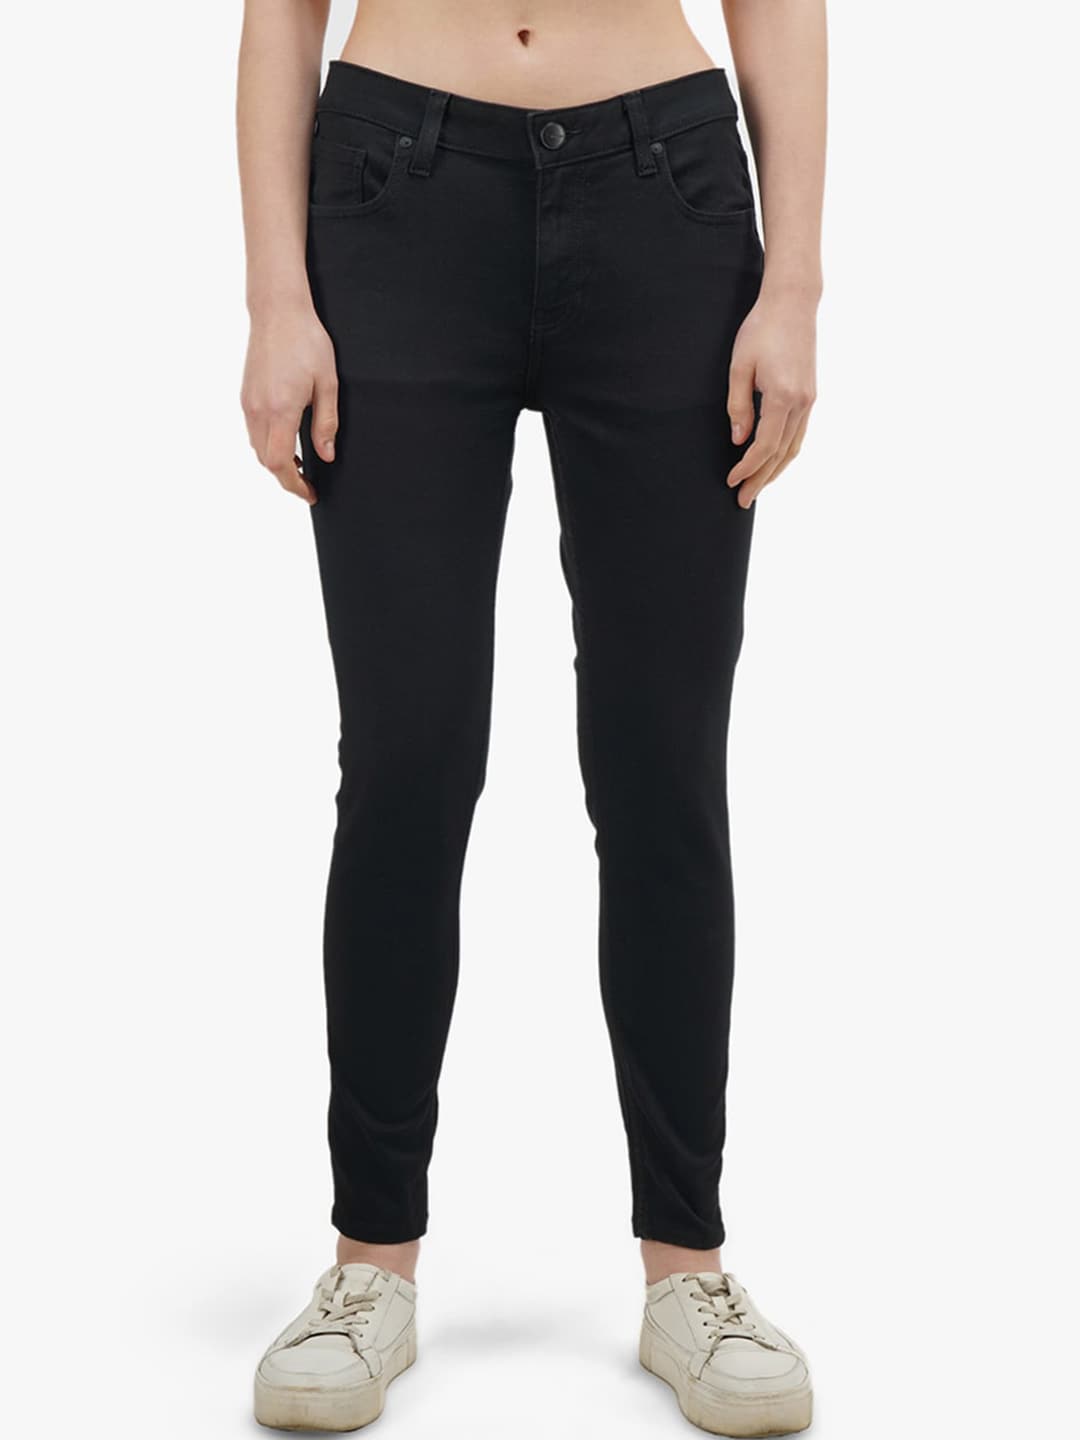 United Colors of Benetton Women Black Skinny Fit Cropped Jeans Price in India